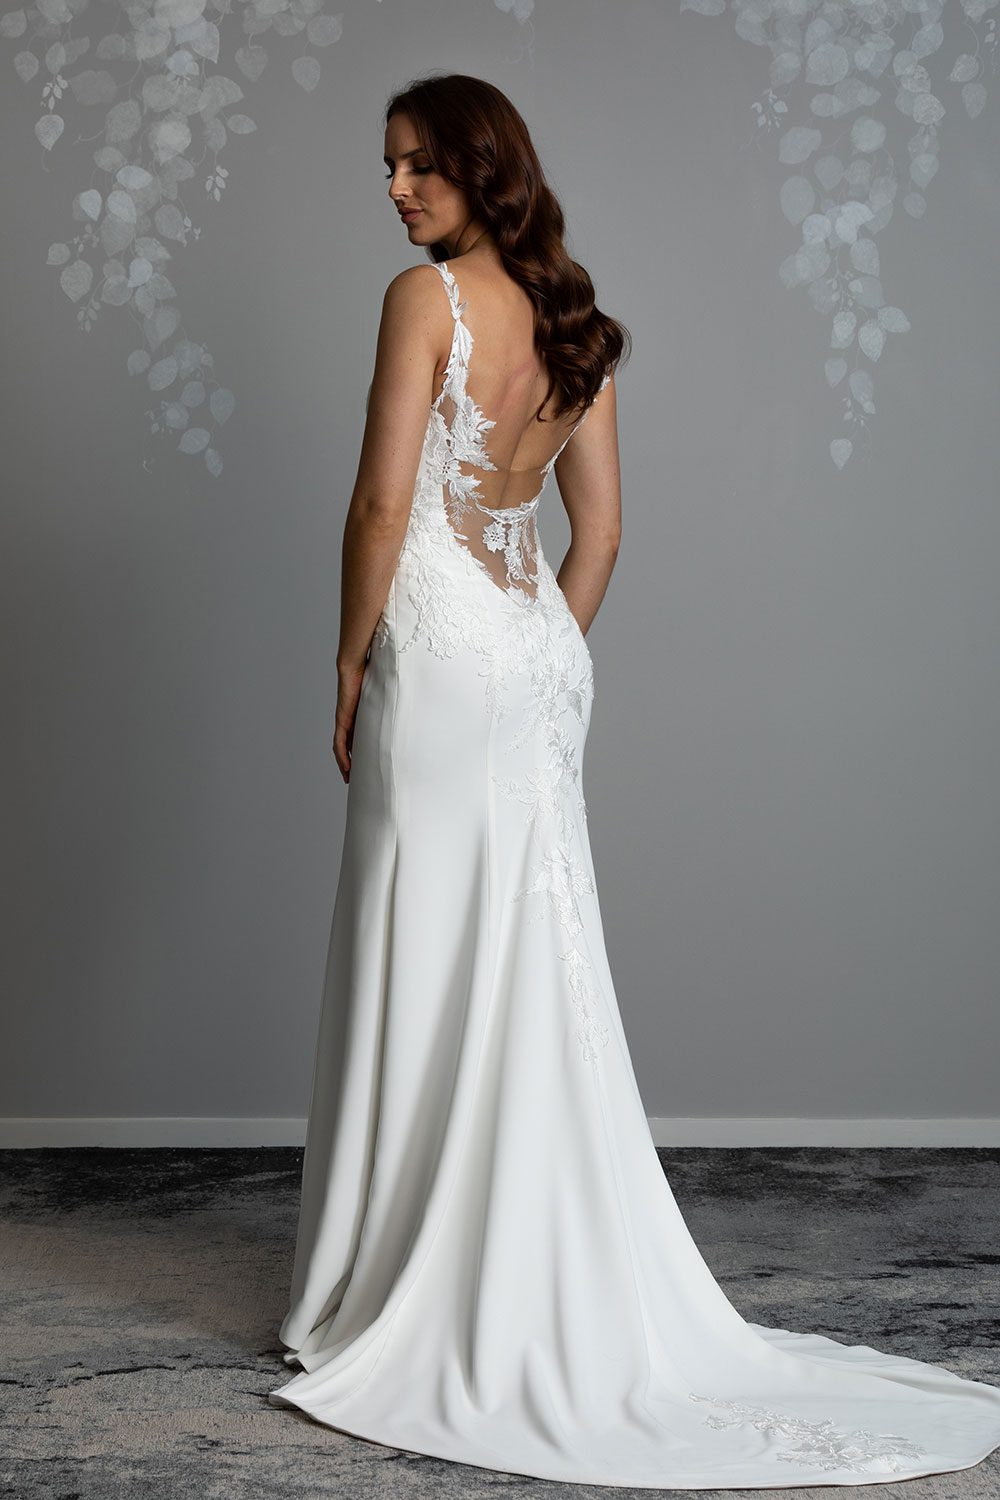 Ana Wedding gown from Vinka Design - This beautiful gown is graced by hand-appliqued delicate floral leaf lace, subtly worked into the front of the bodice and more prominently on the back. A fit-and-flare cut shapes the figure. Model showing side profile of low back with stunning lace on illusion tulle